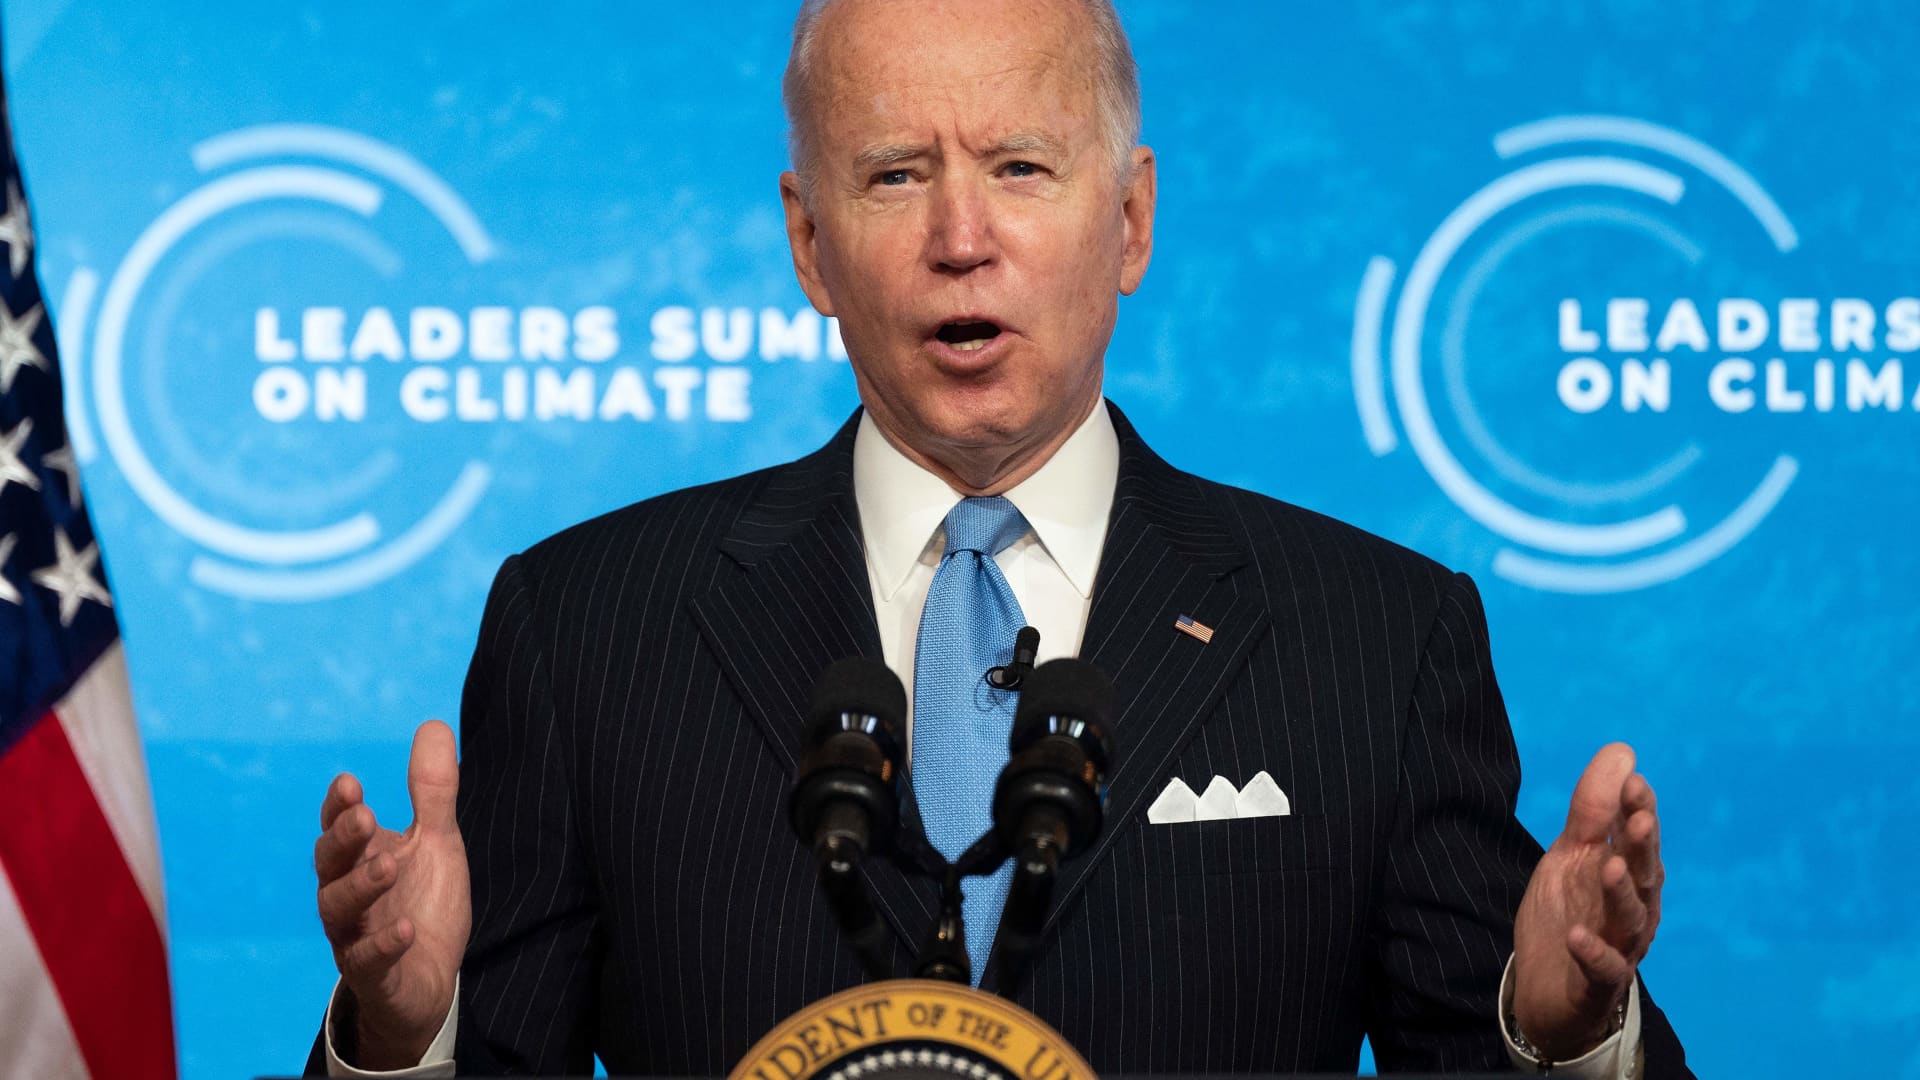 US President Joe Biden delivers remarks and participates in the virtual Leaders Summit on Climate Session 5: The Economic Opportunities of Climate Action from the White House in Washington, DC, on April 23, 2021.